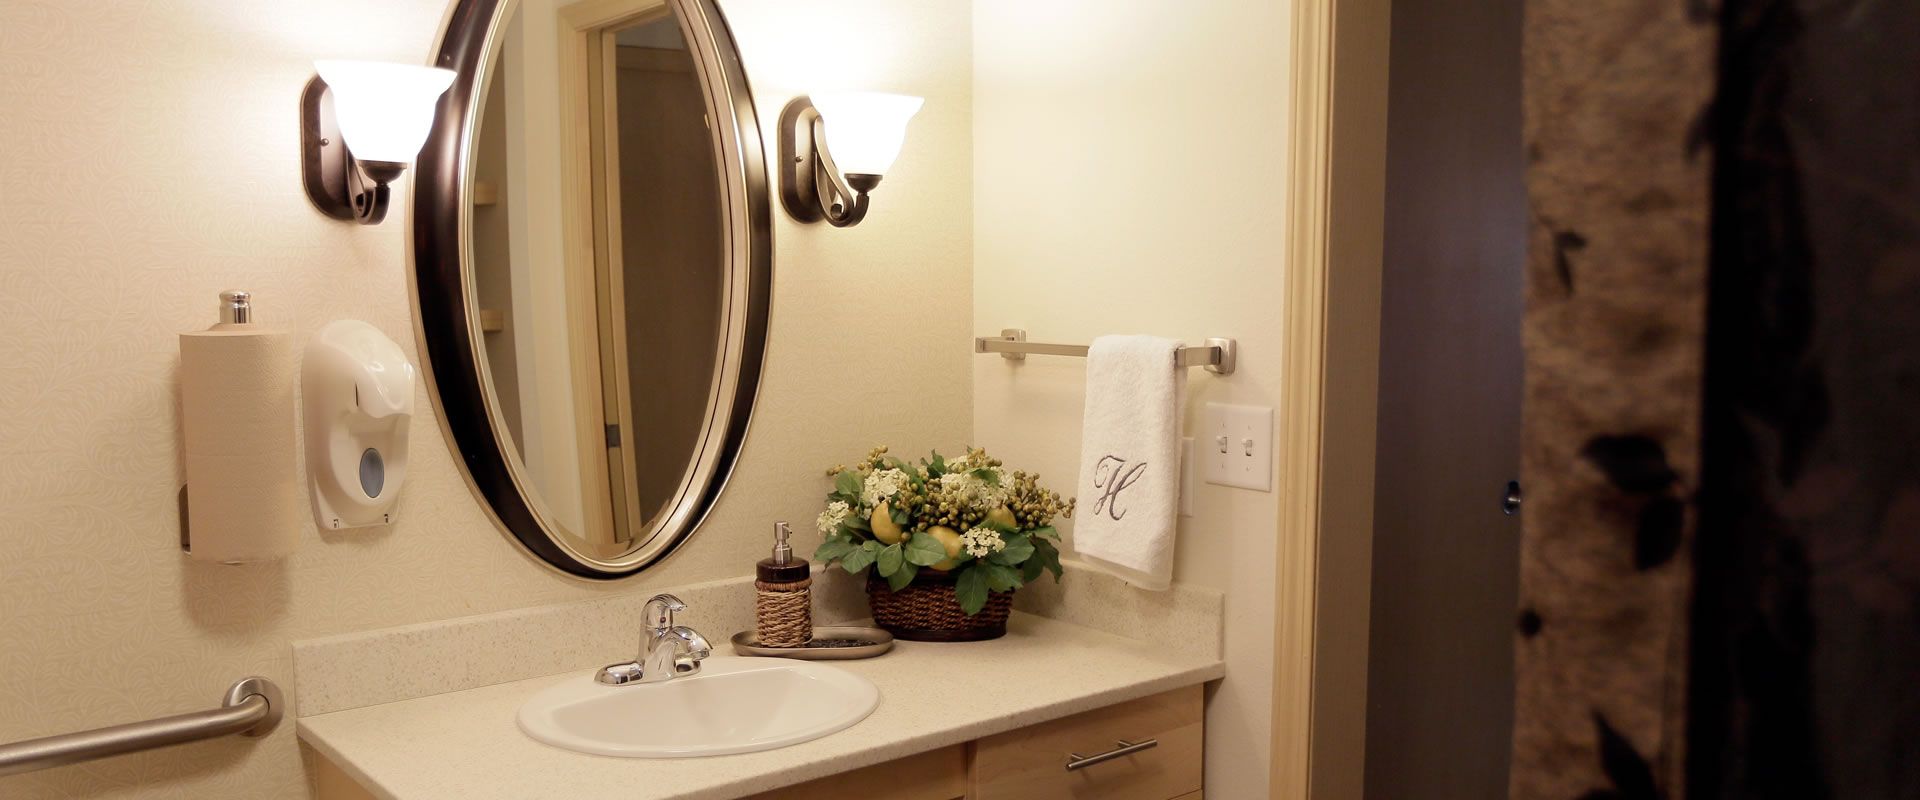 Senior living community Highgate at Prescott Lakes featuring a sink, plants, and decor.